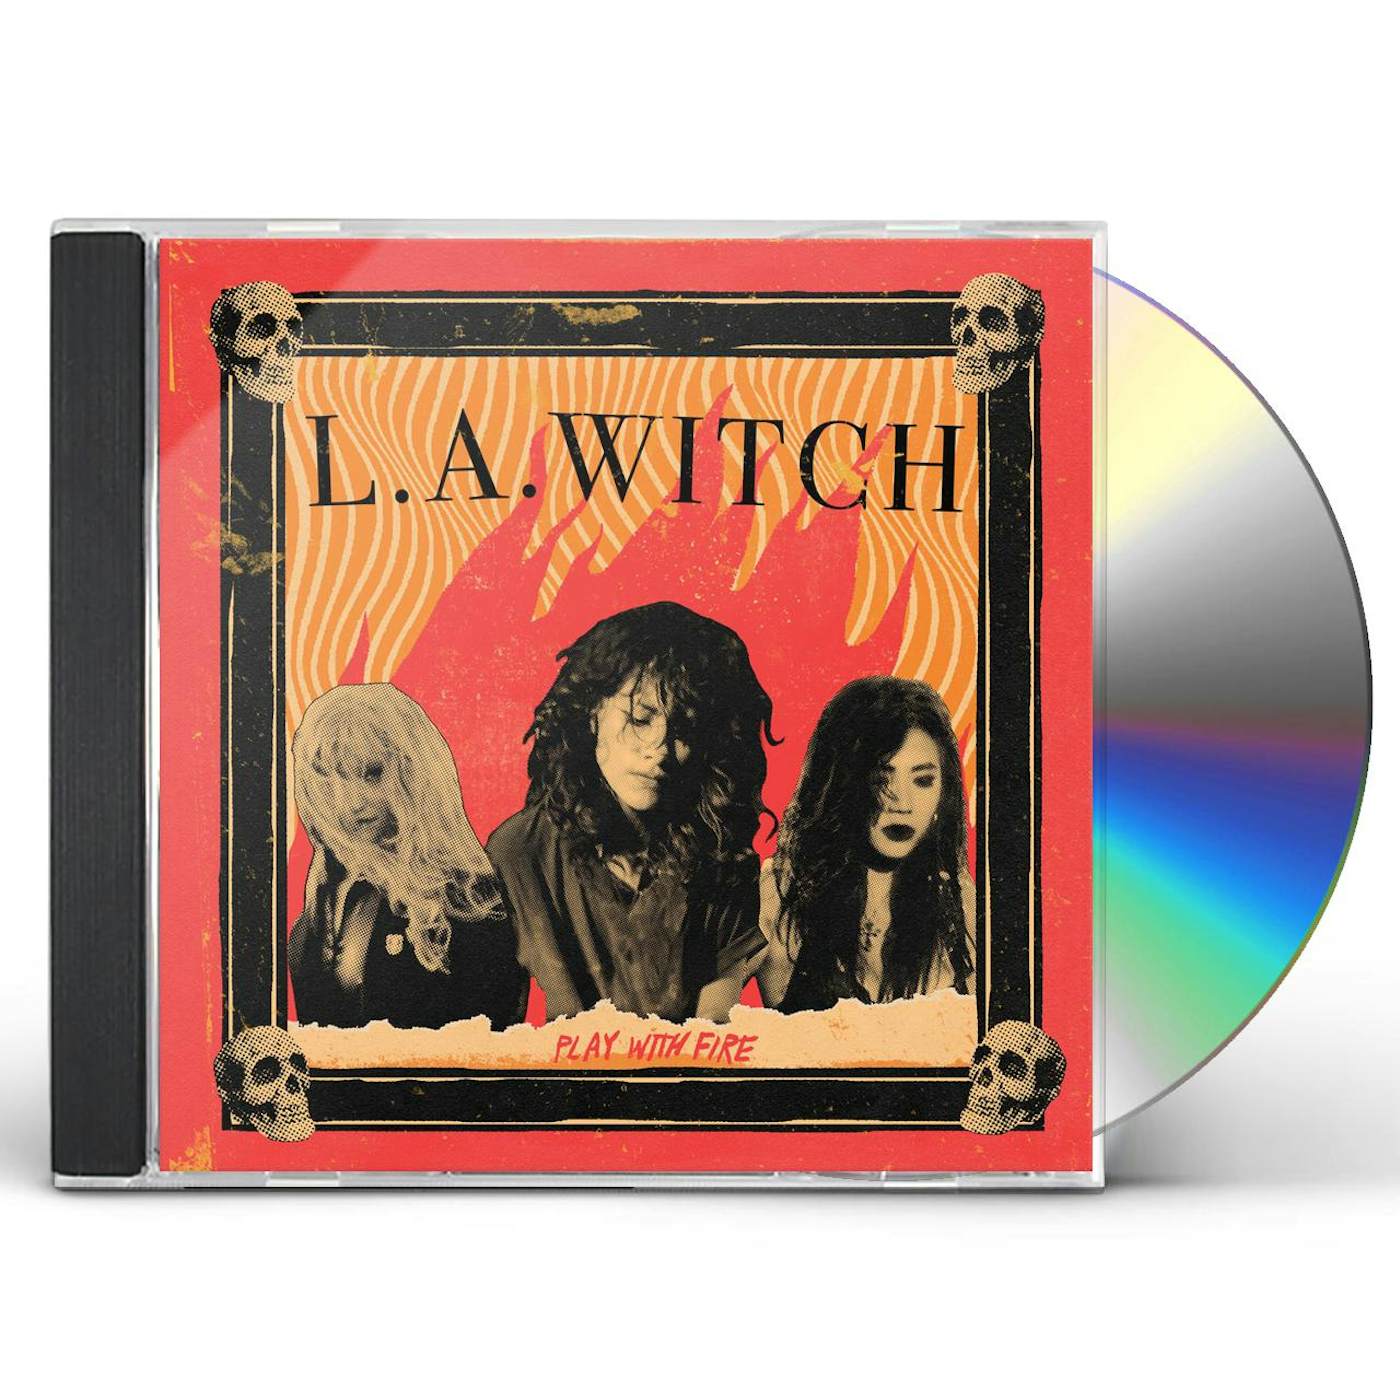 L.A. WITCH PLAY WITH FIRE CD